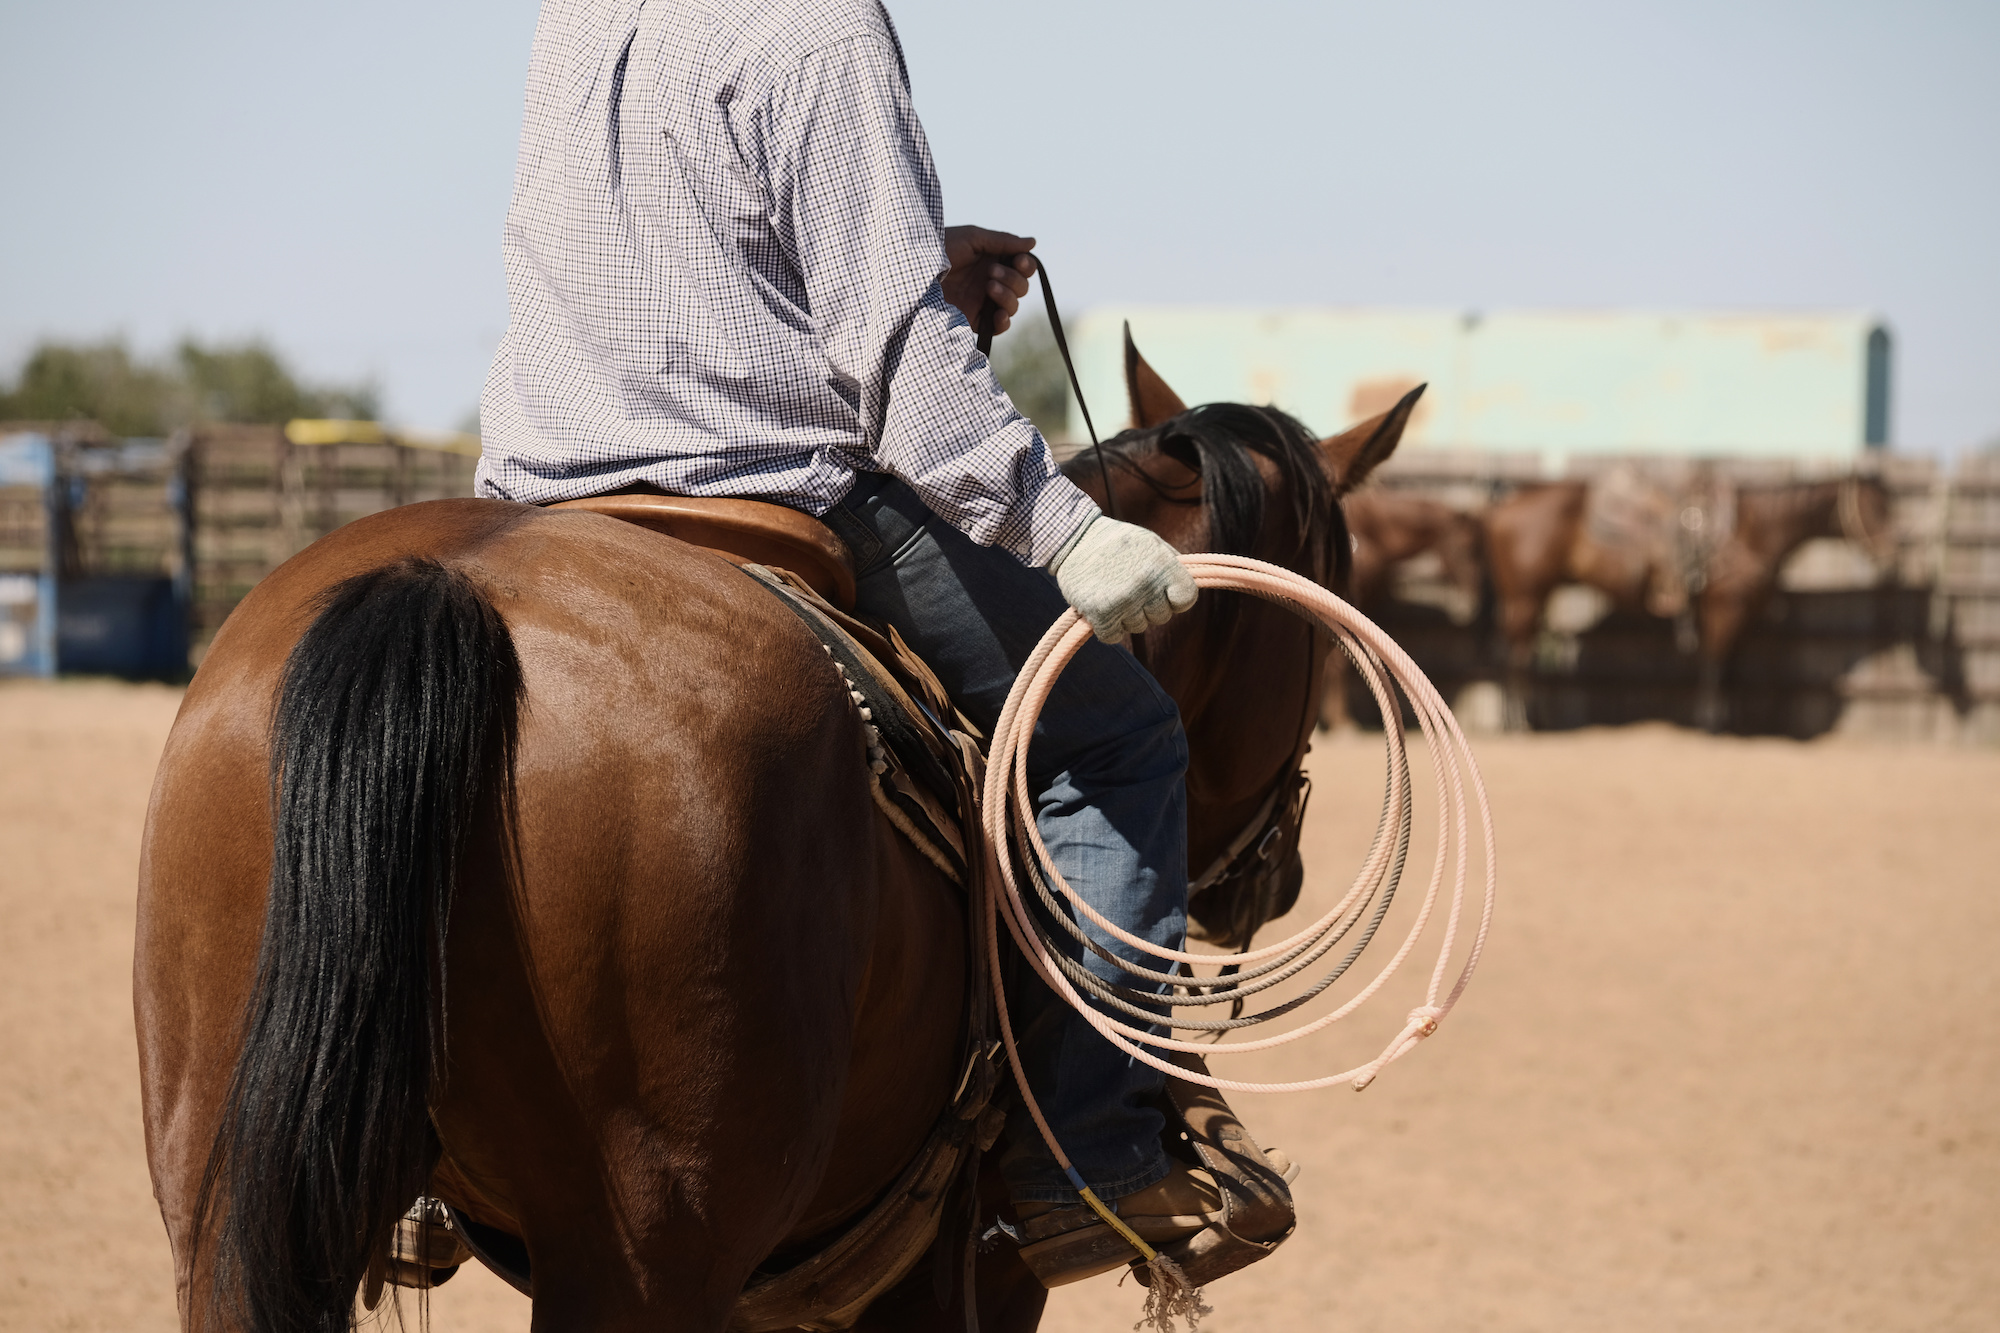 Western rodeo lifestyle shows rider on bay horse with rope for team roping practice in outdoor arena